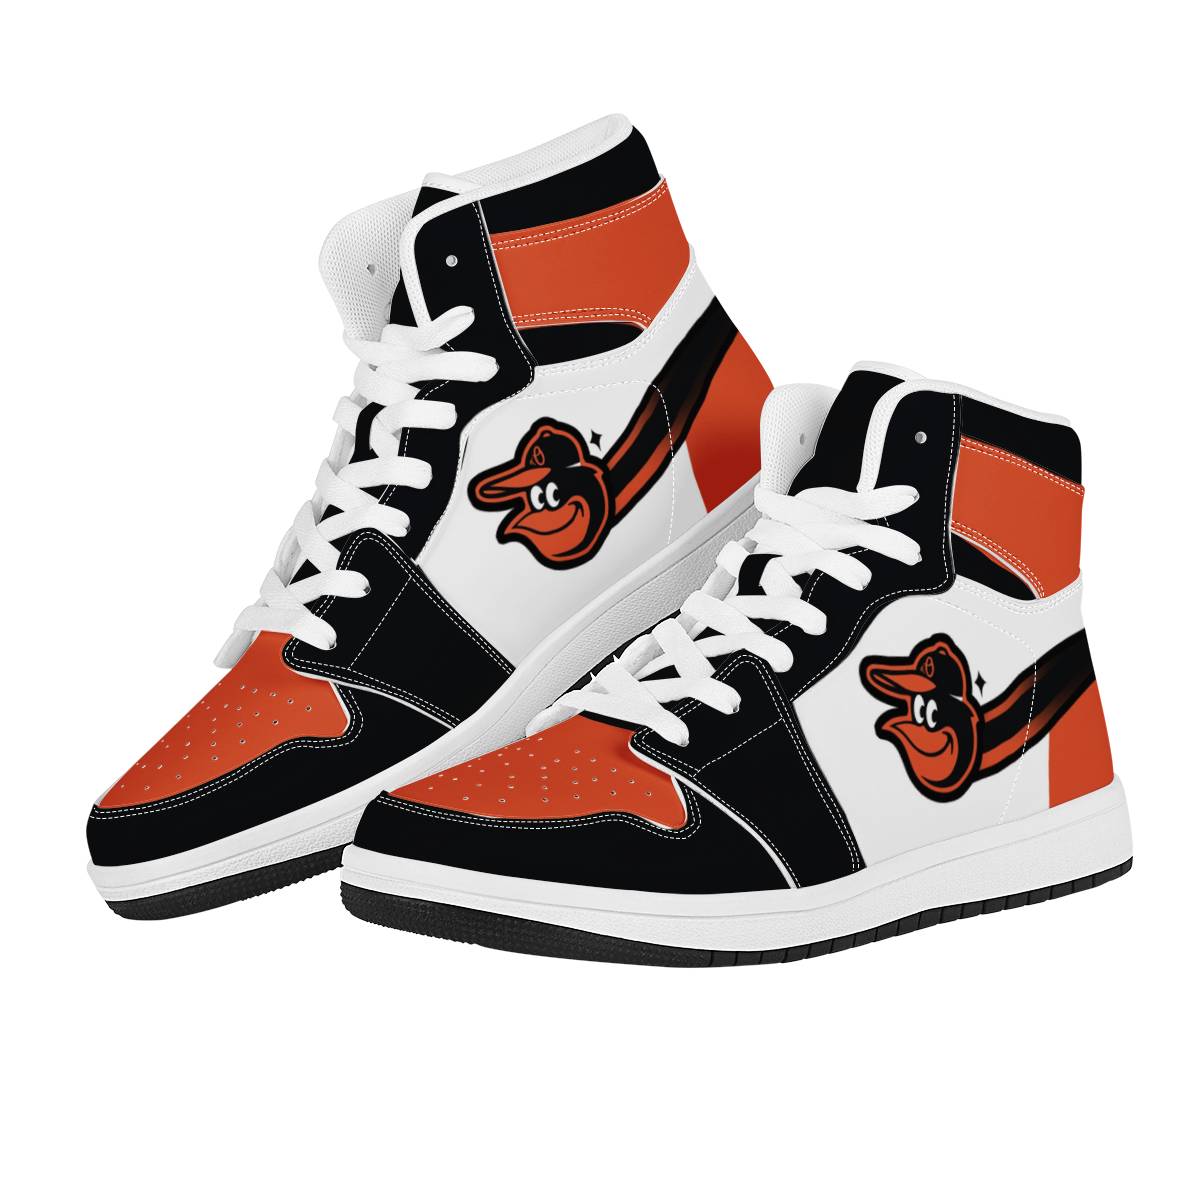 Women's Baltimore Orioles High Top Leather AJ1 Sneakers 003